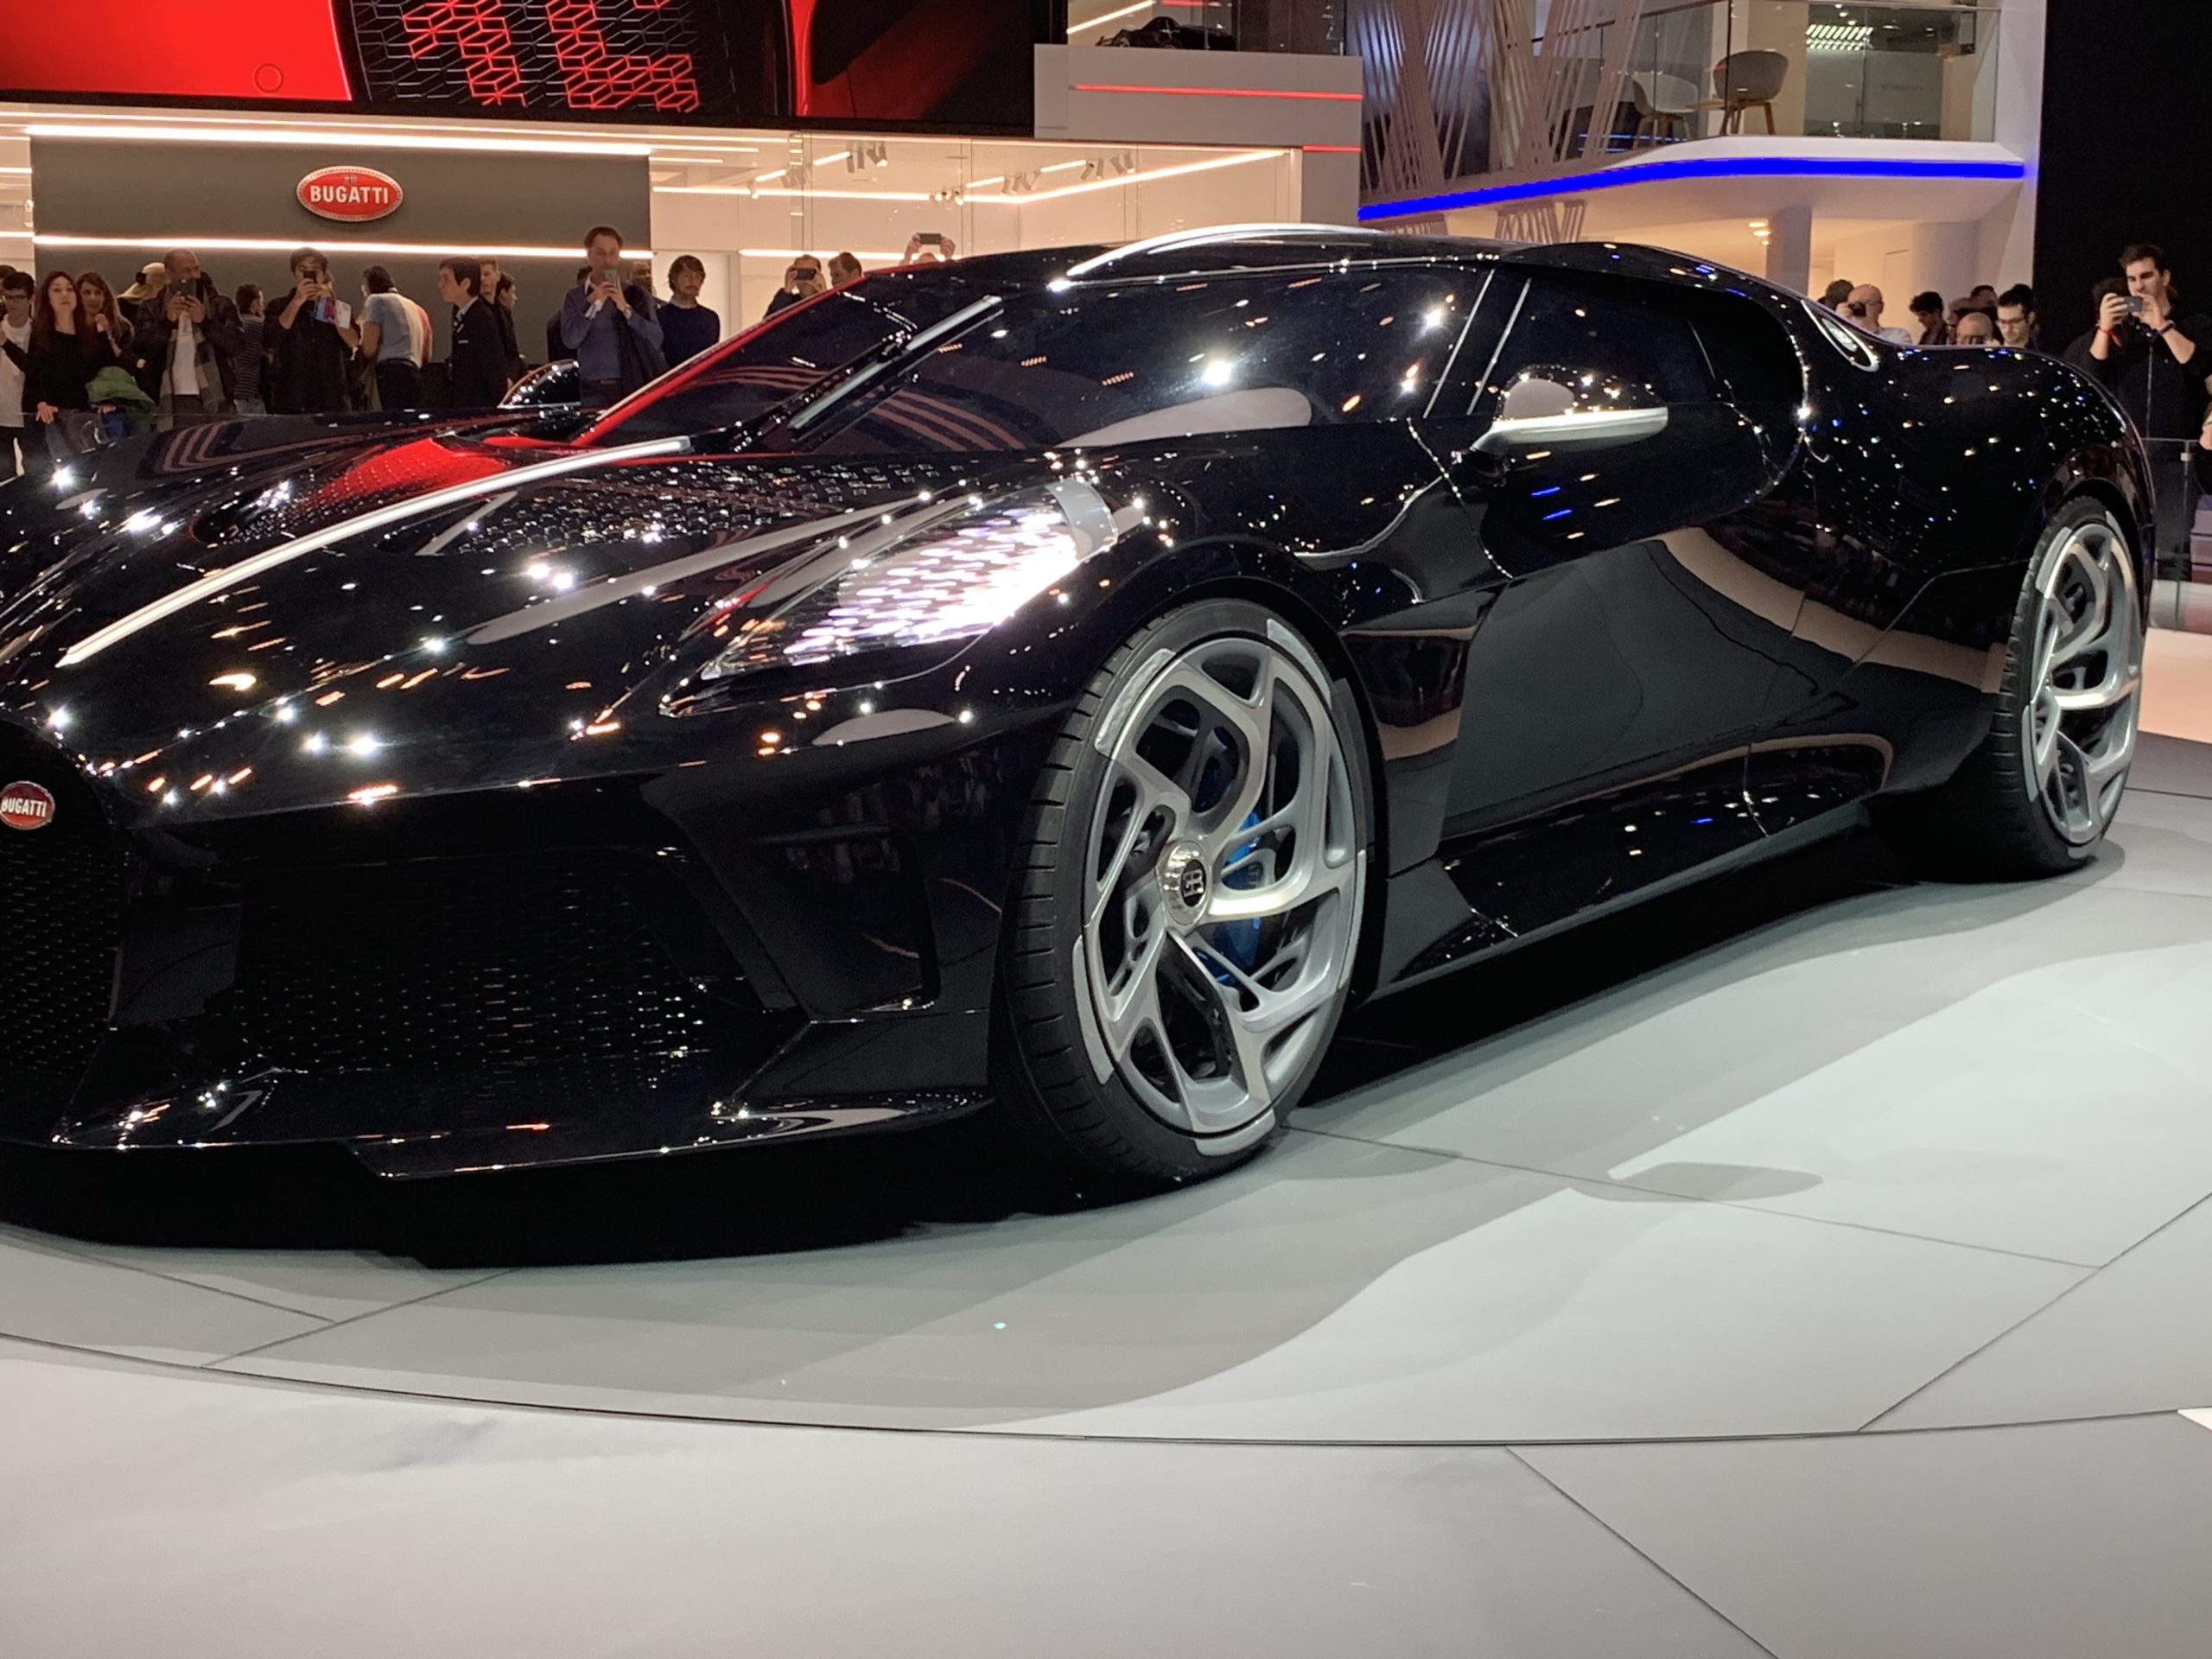 We attended the GENEVE Motor Show 2019